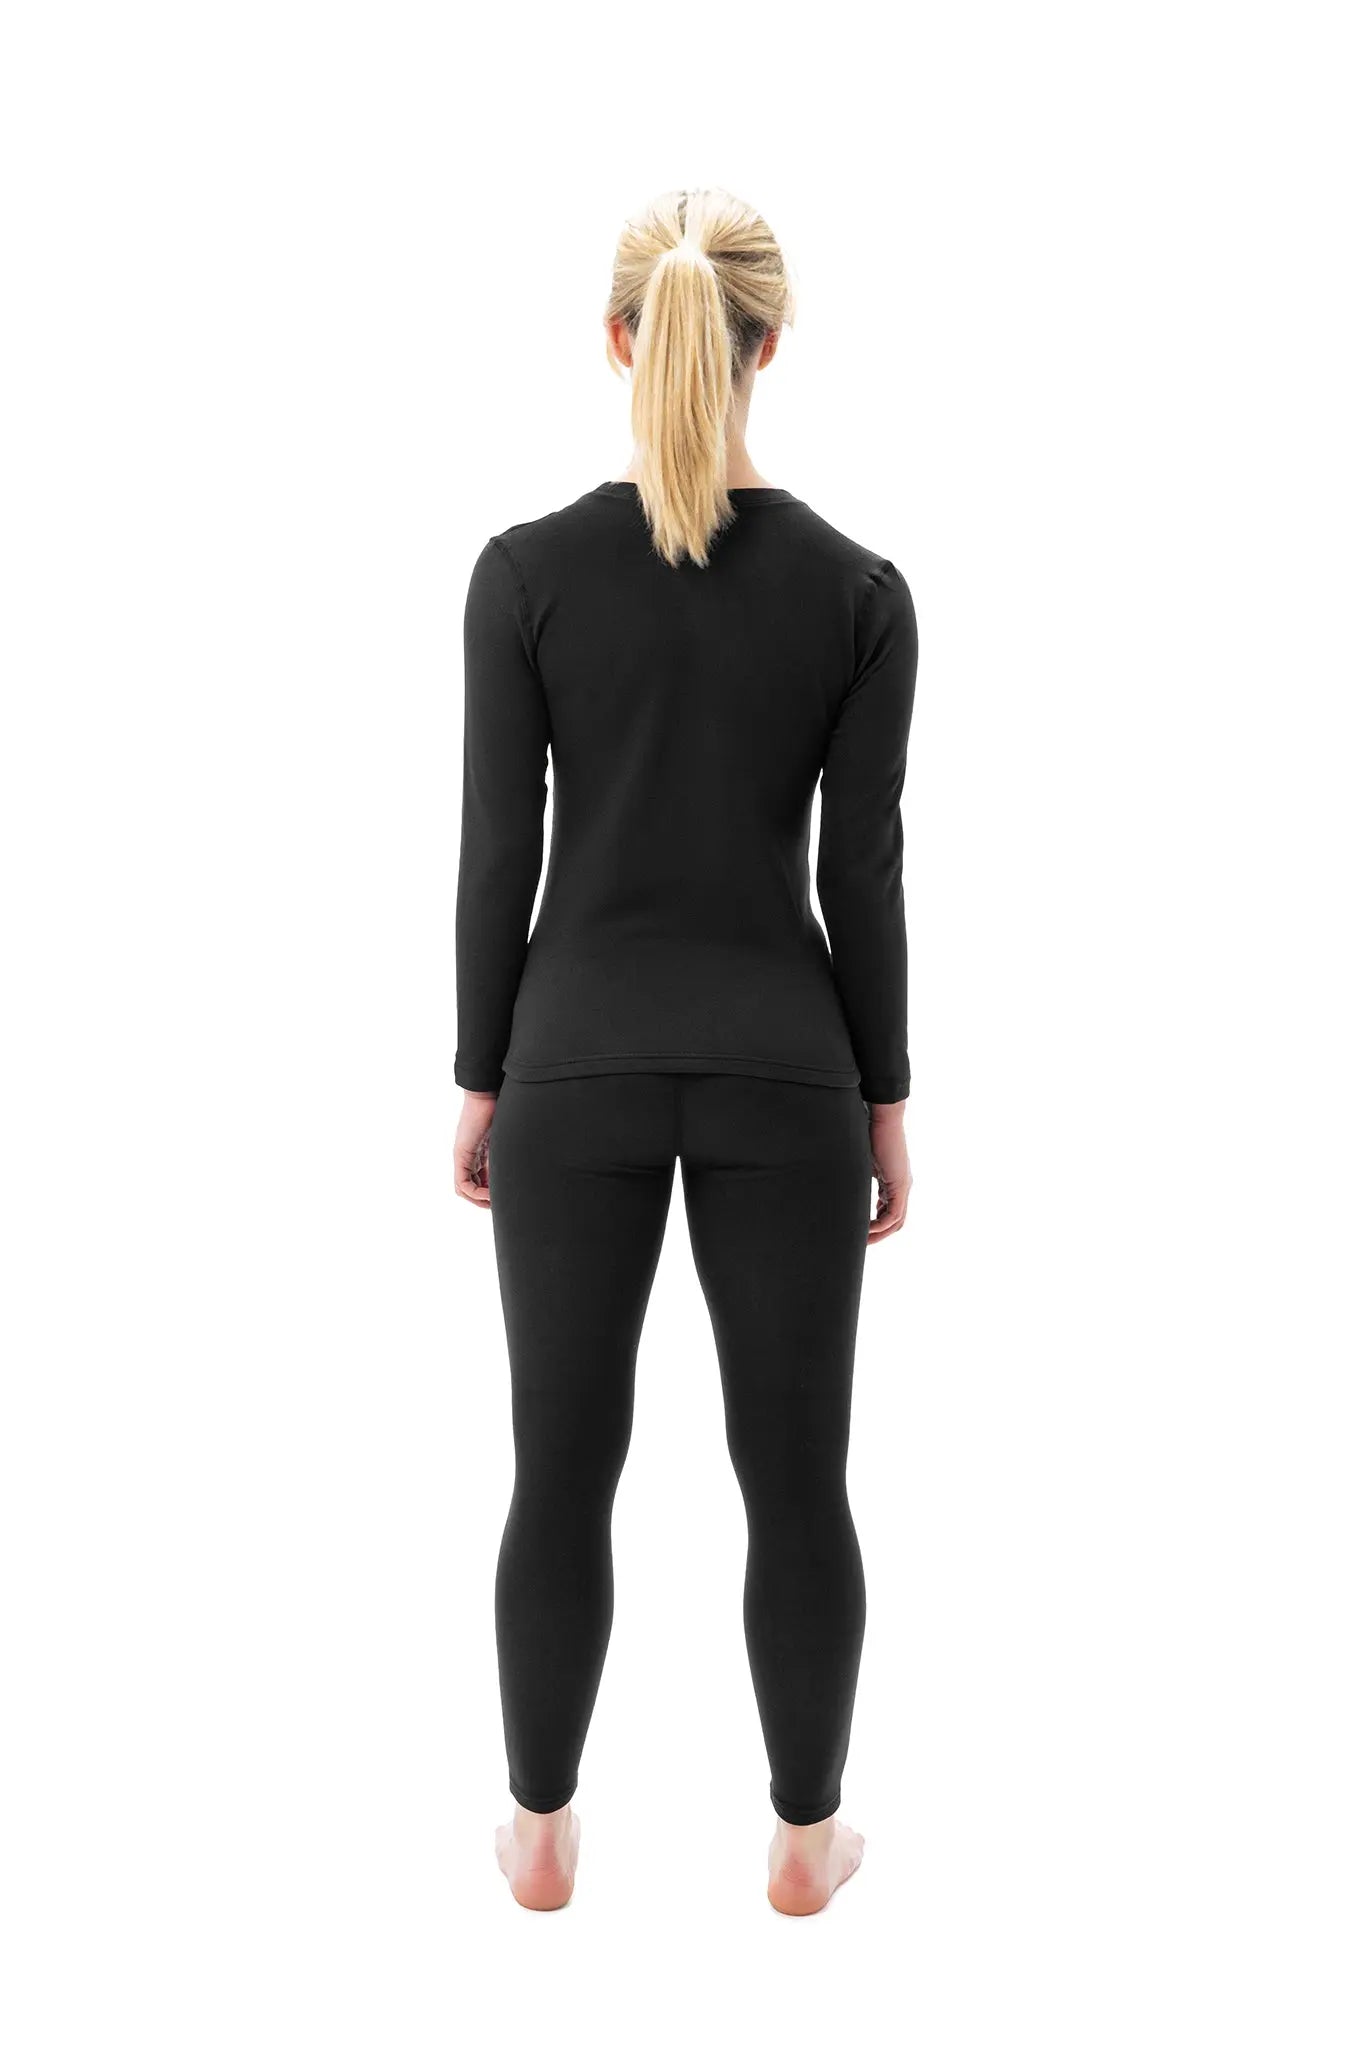 My Thermals Classic Set, Ultimate Comfort: Women's Thermal